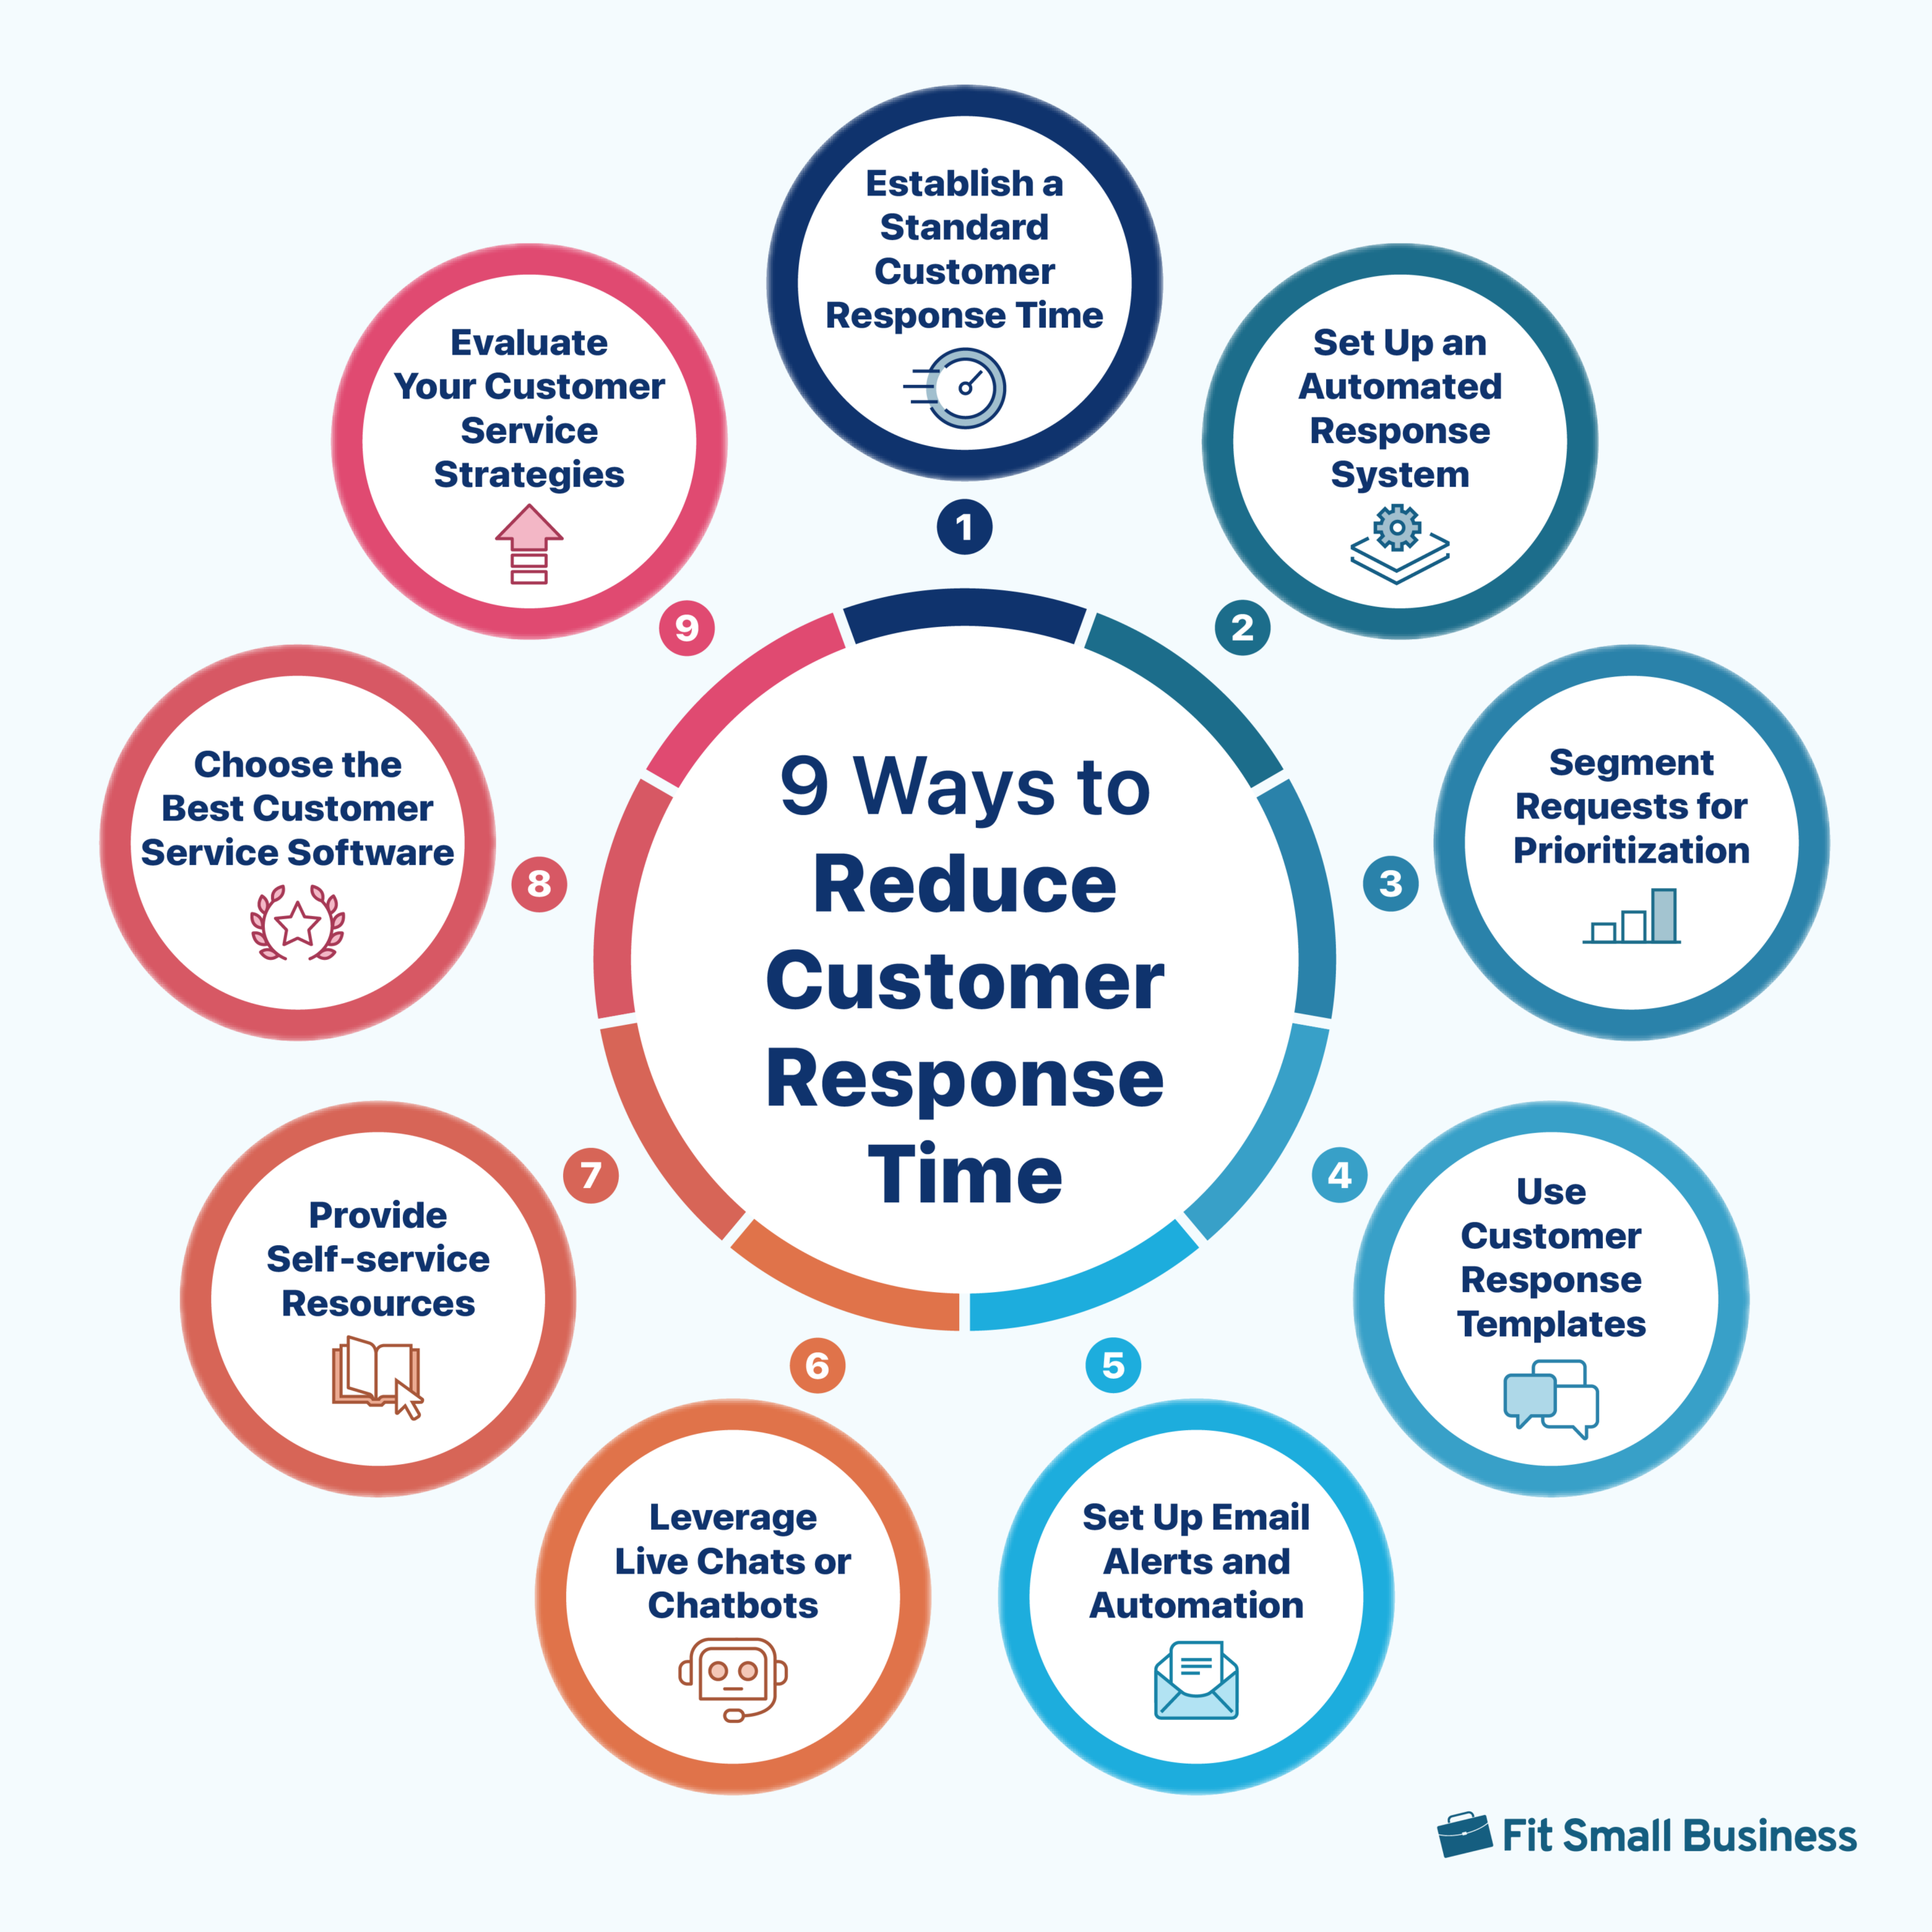 A graphic on how to reduce customer response time.